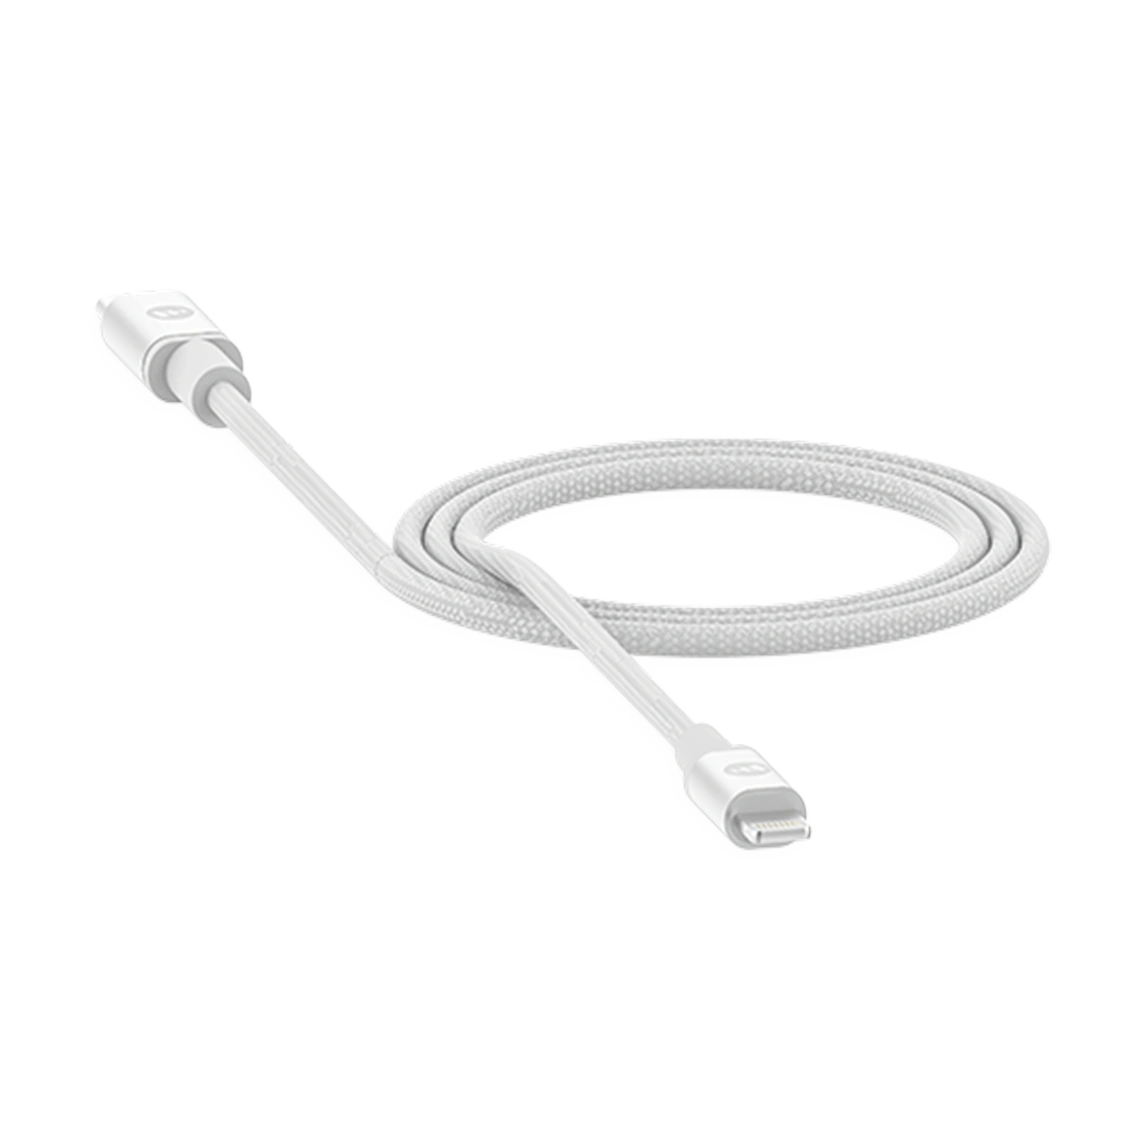 Mophie USB-C to Lightning Cable 1.8m